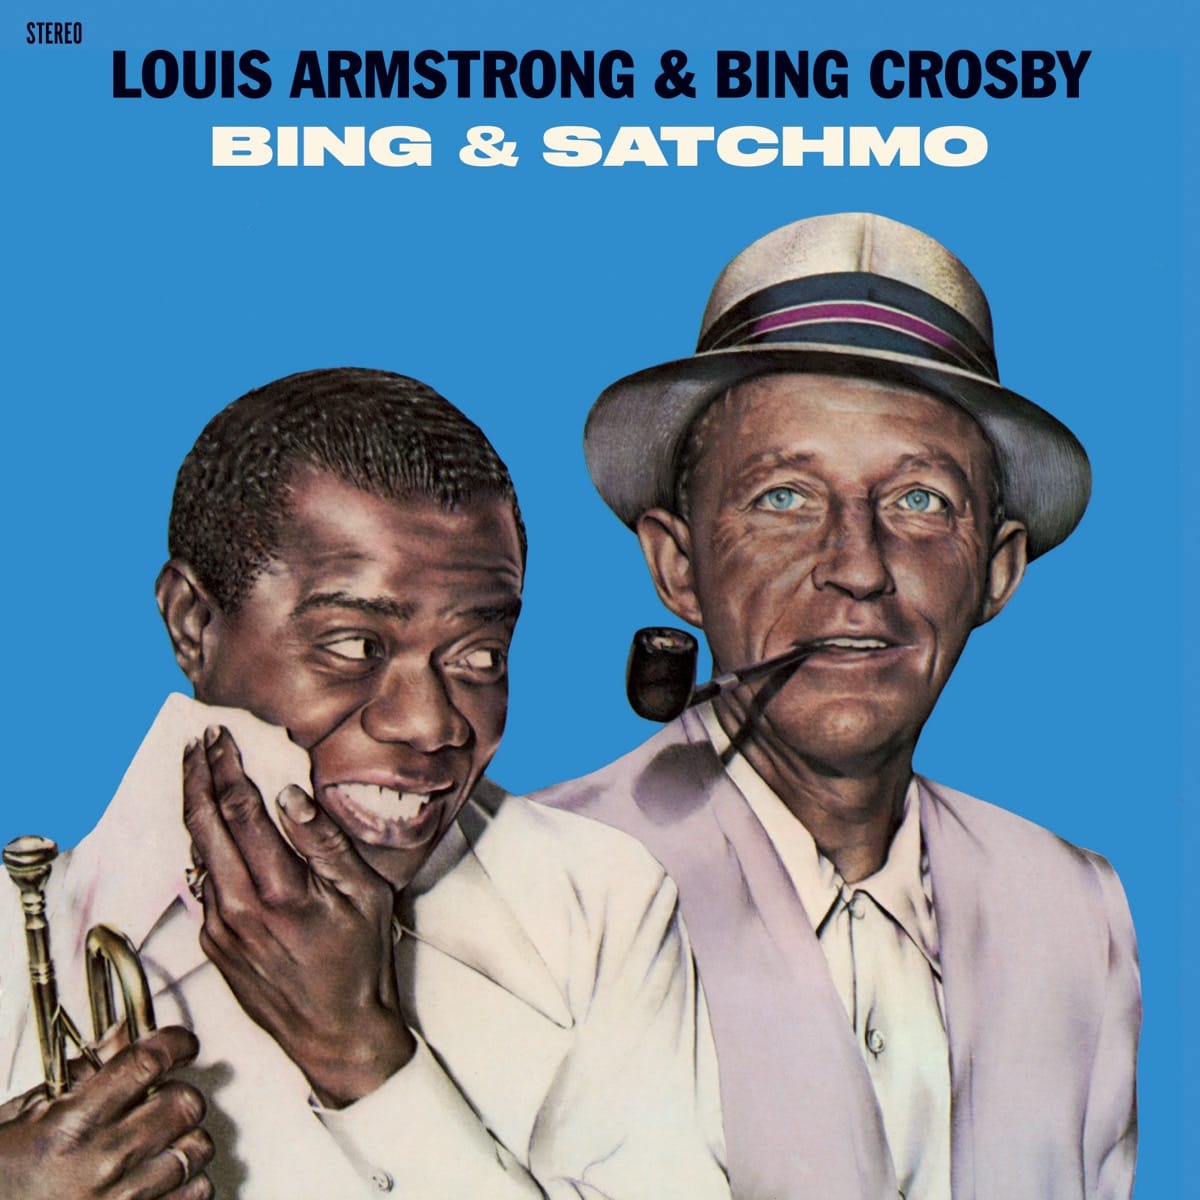 Louis Armstrong - Louis Armstrong was so in-demand on his UK tour